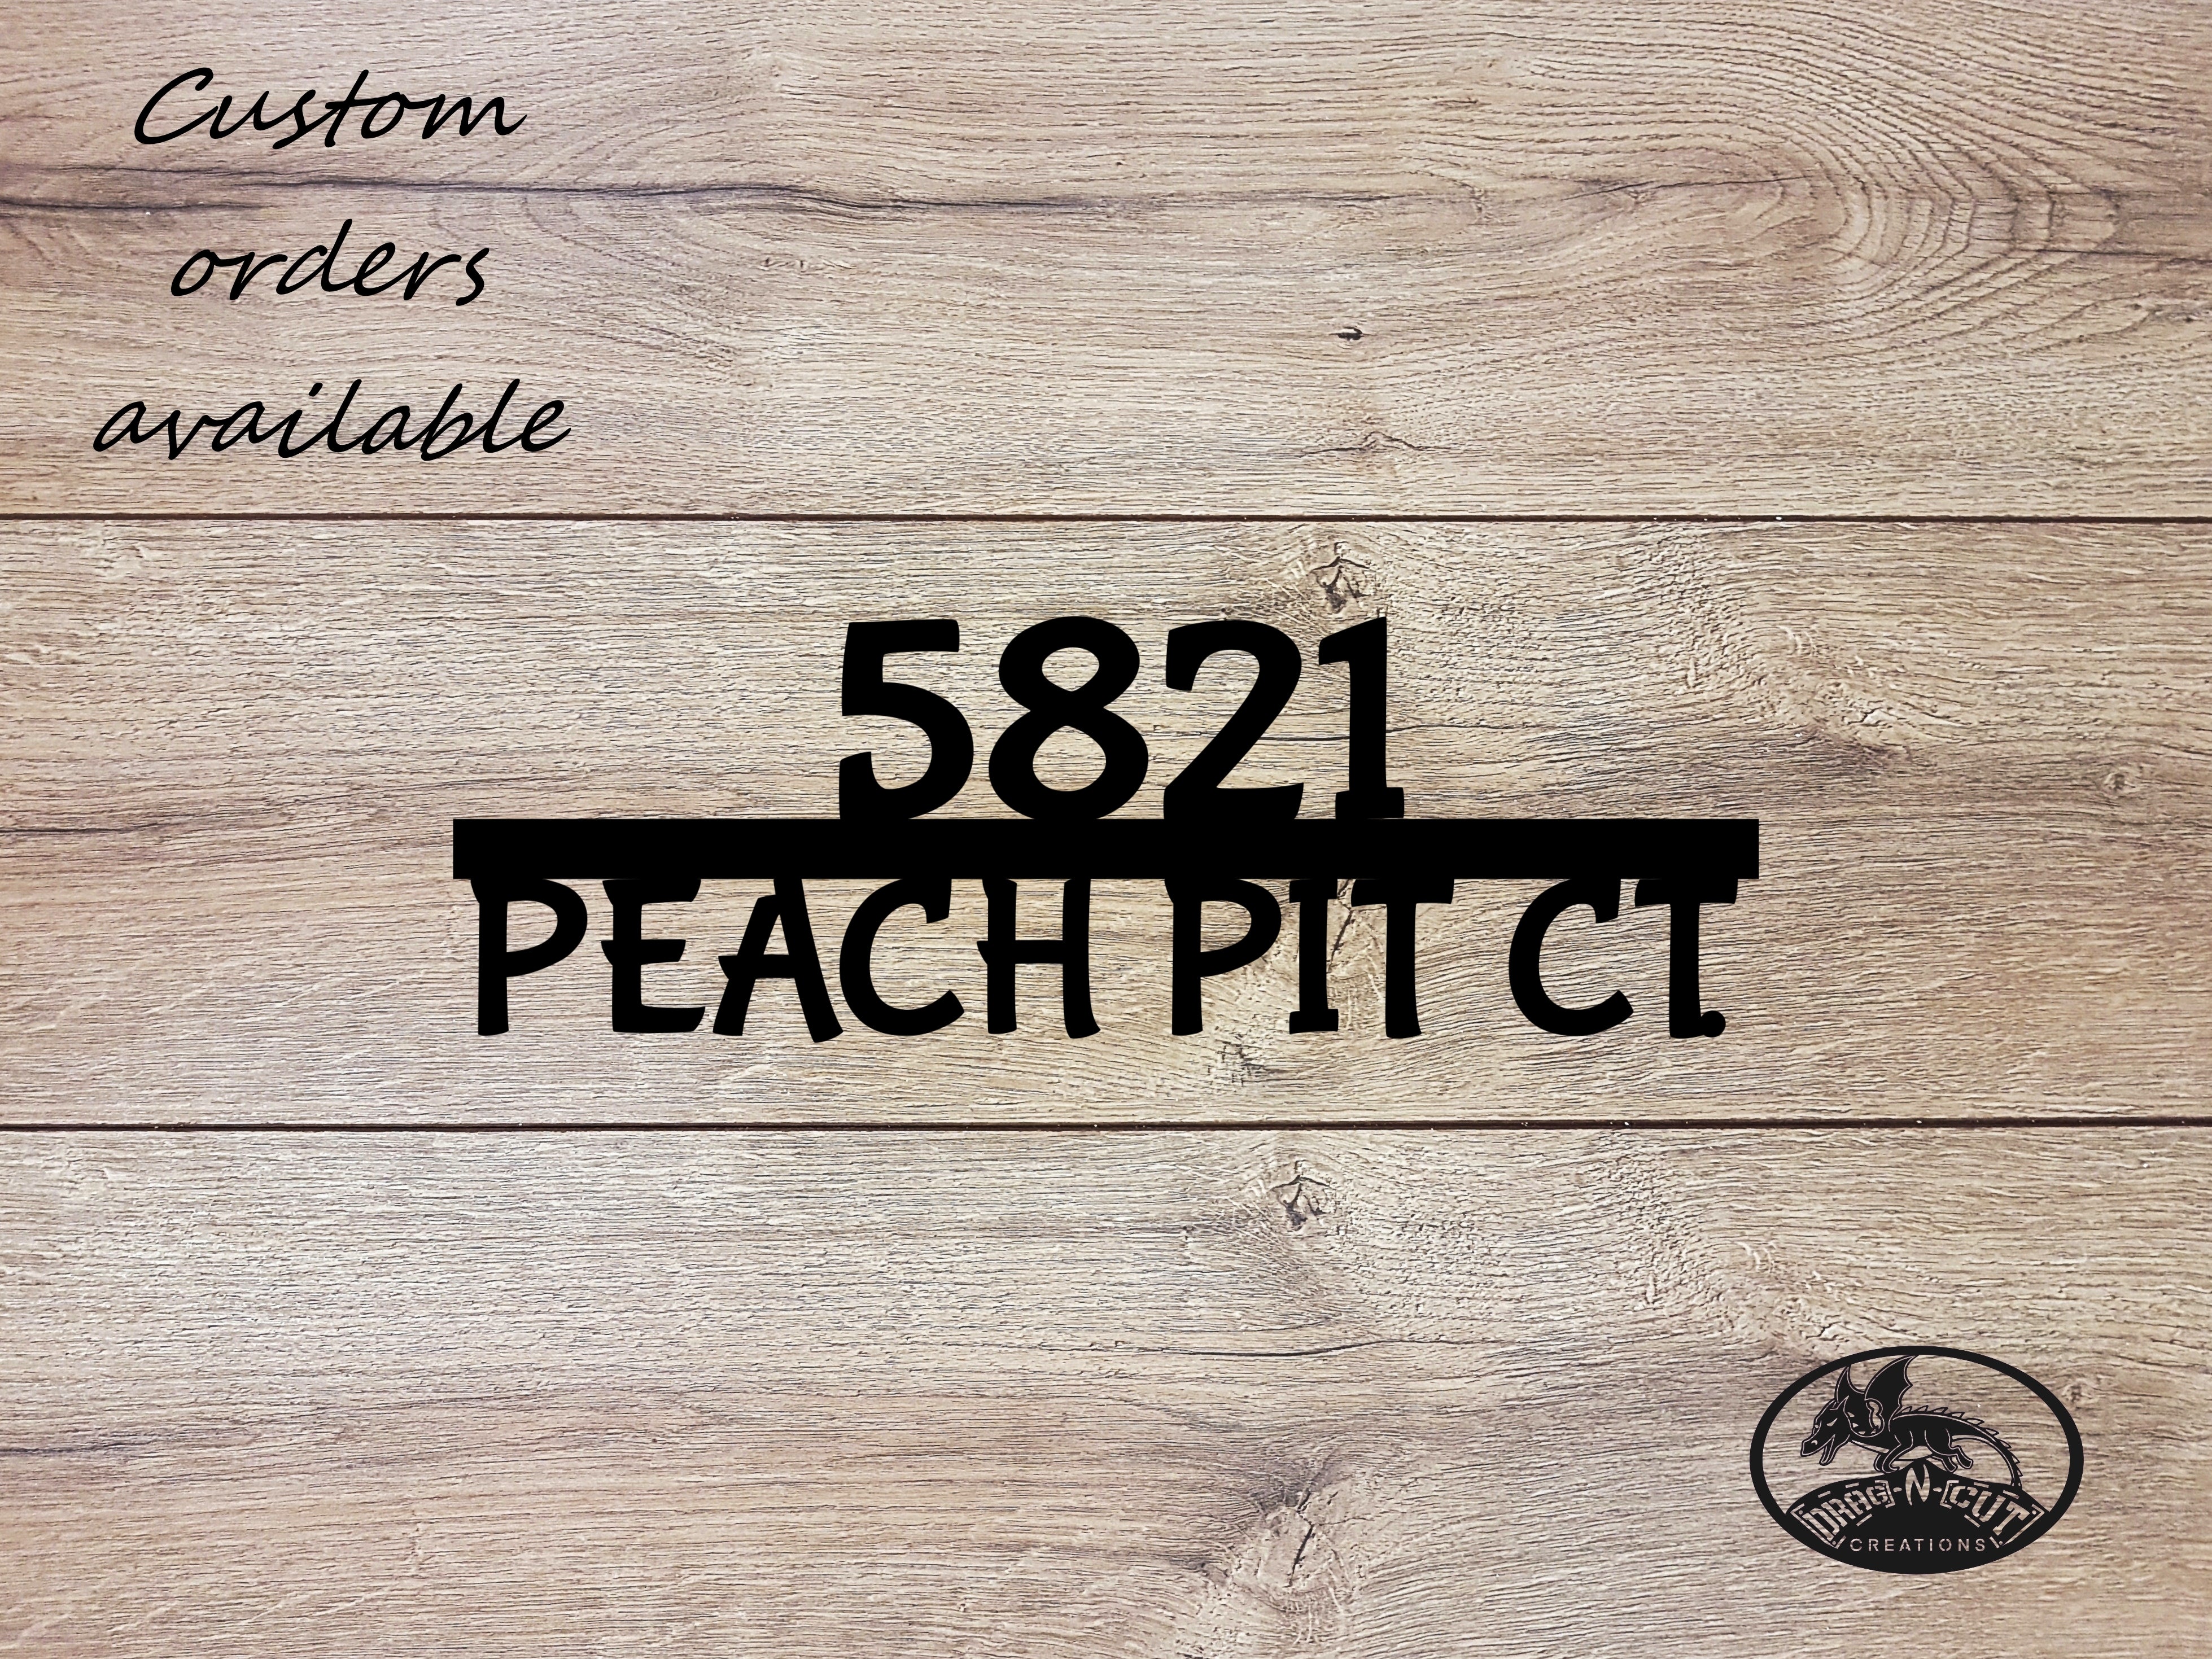 Black durable powder coated outdoor house number address sign.